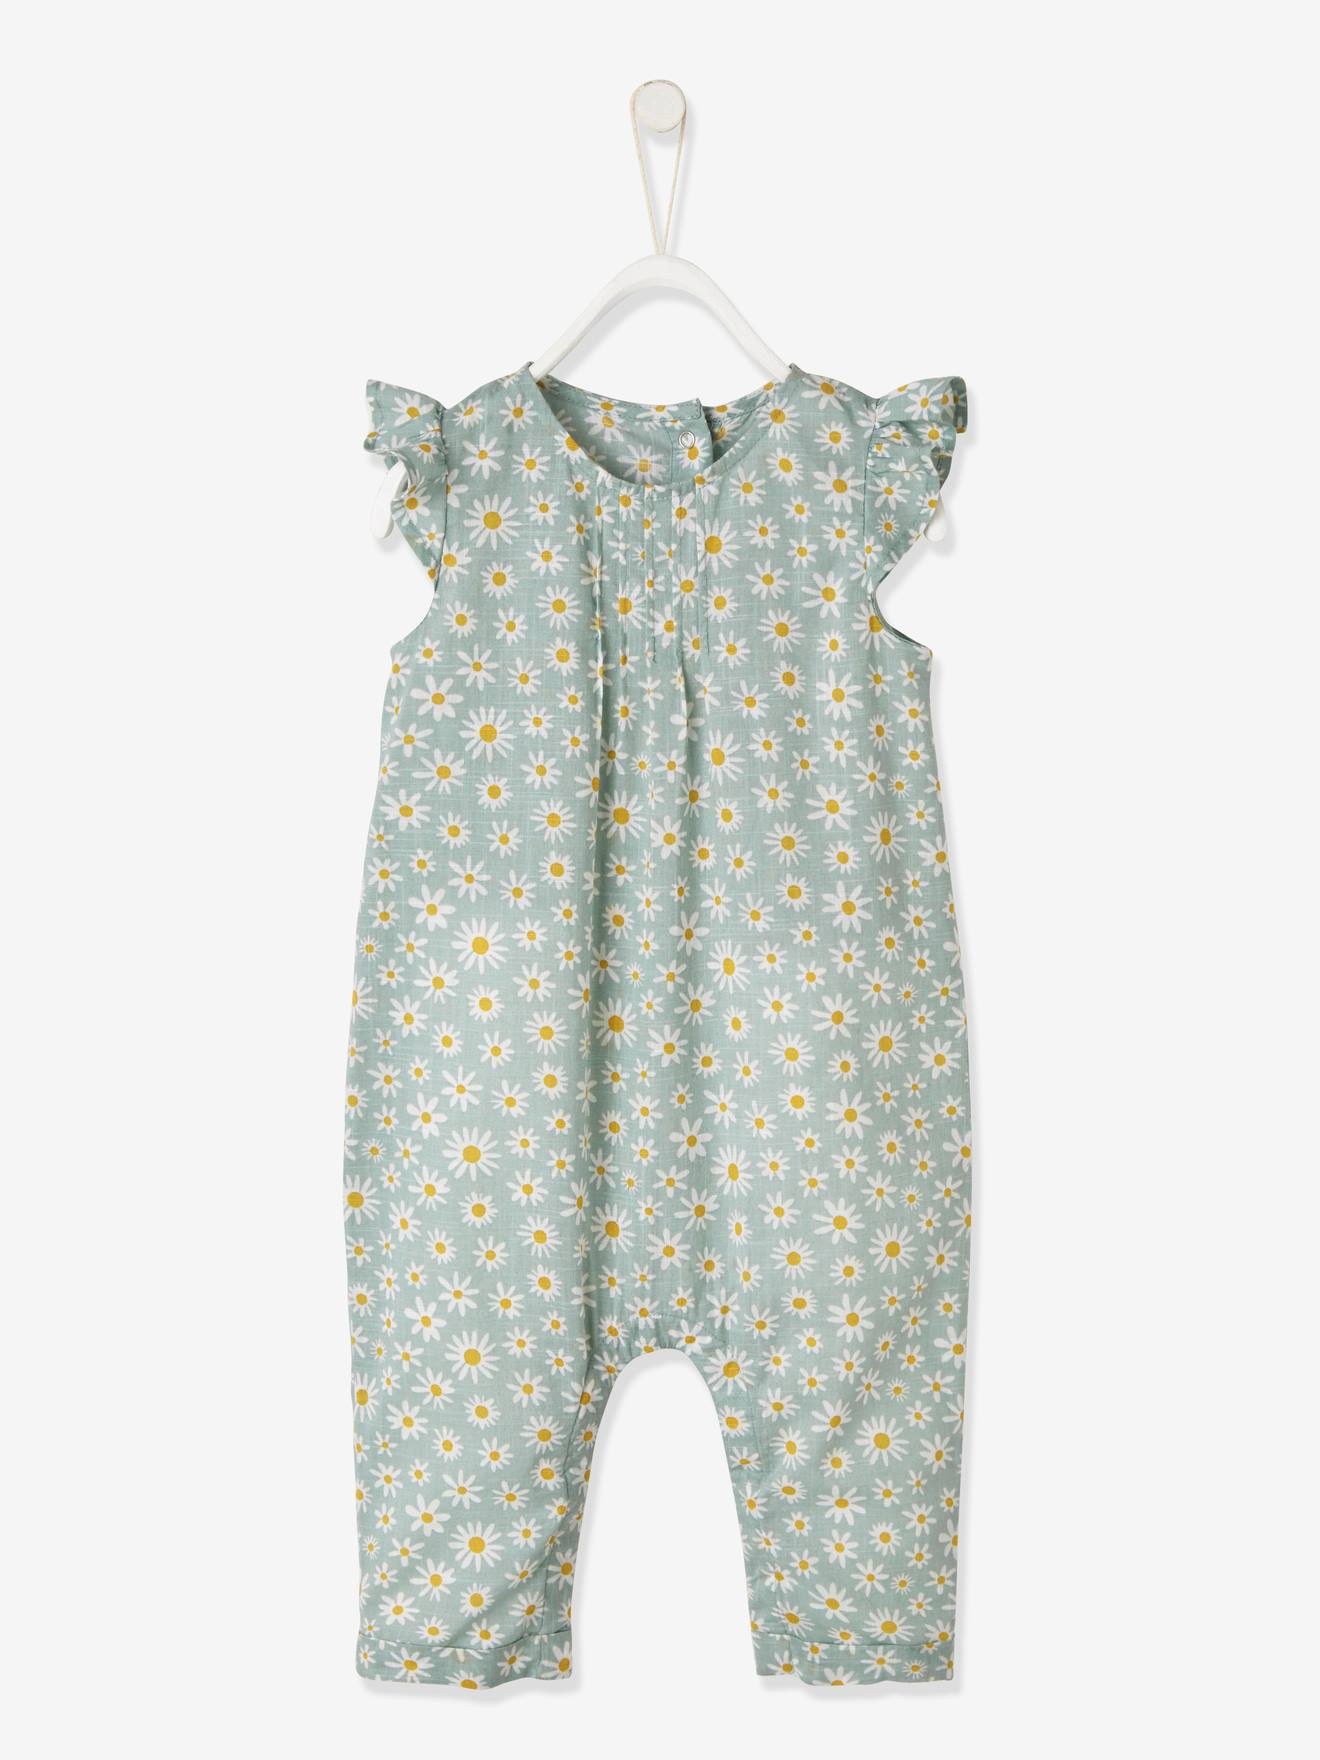 Baby Girl Jumpsuits: Newborn, Infant & Toddler | The Trendy Toddlers